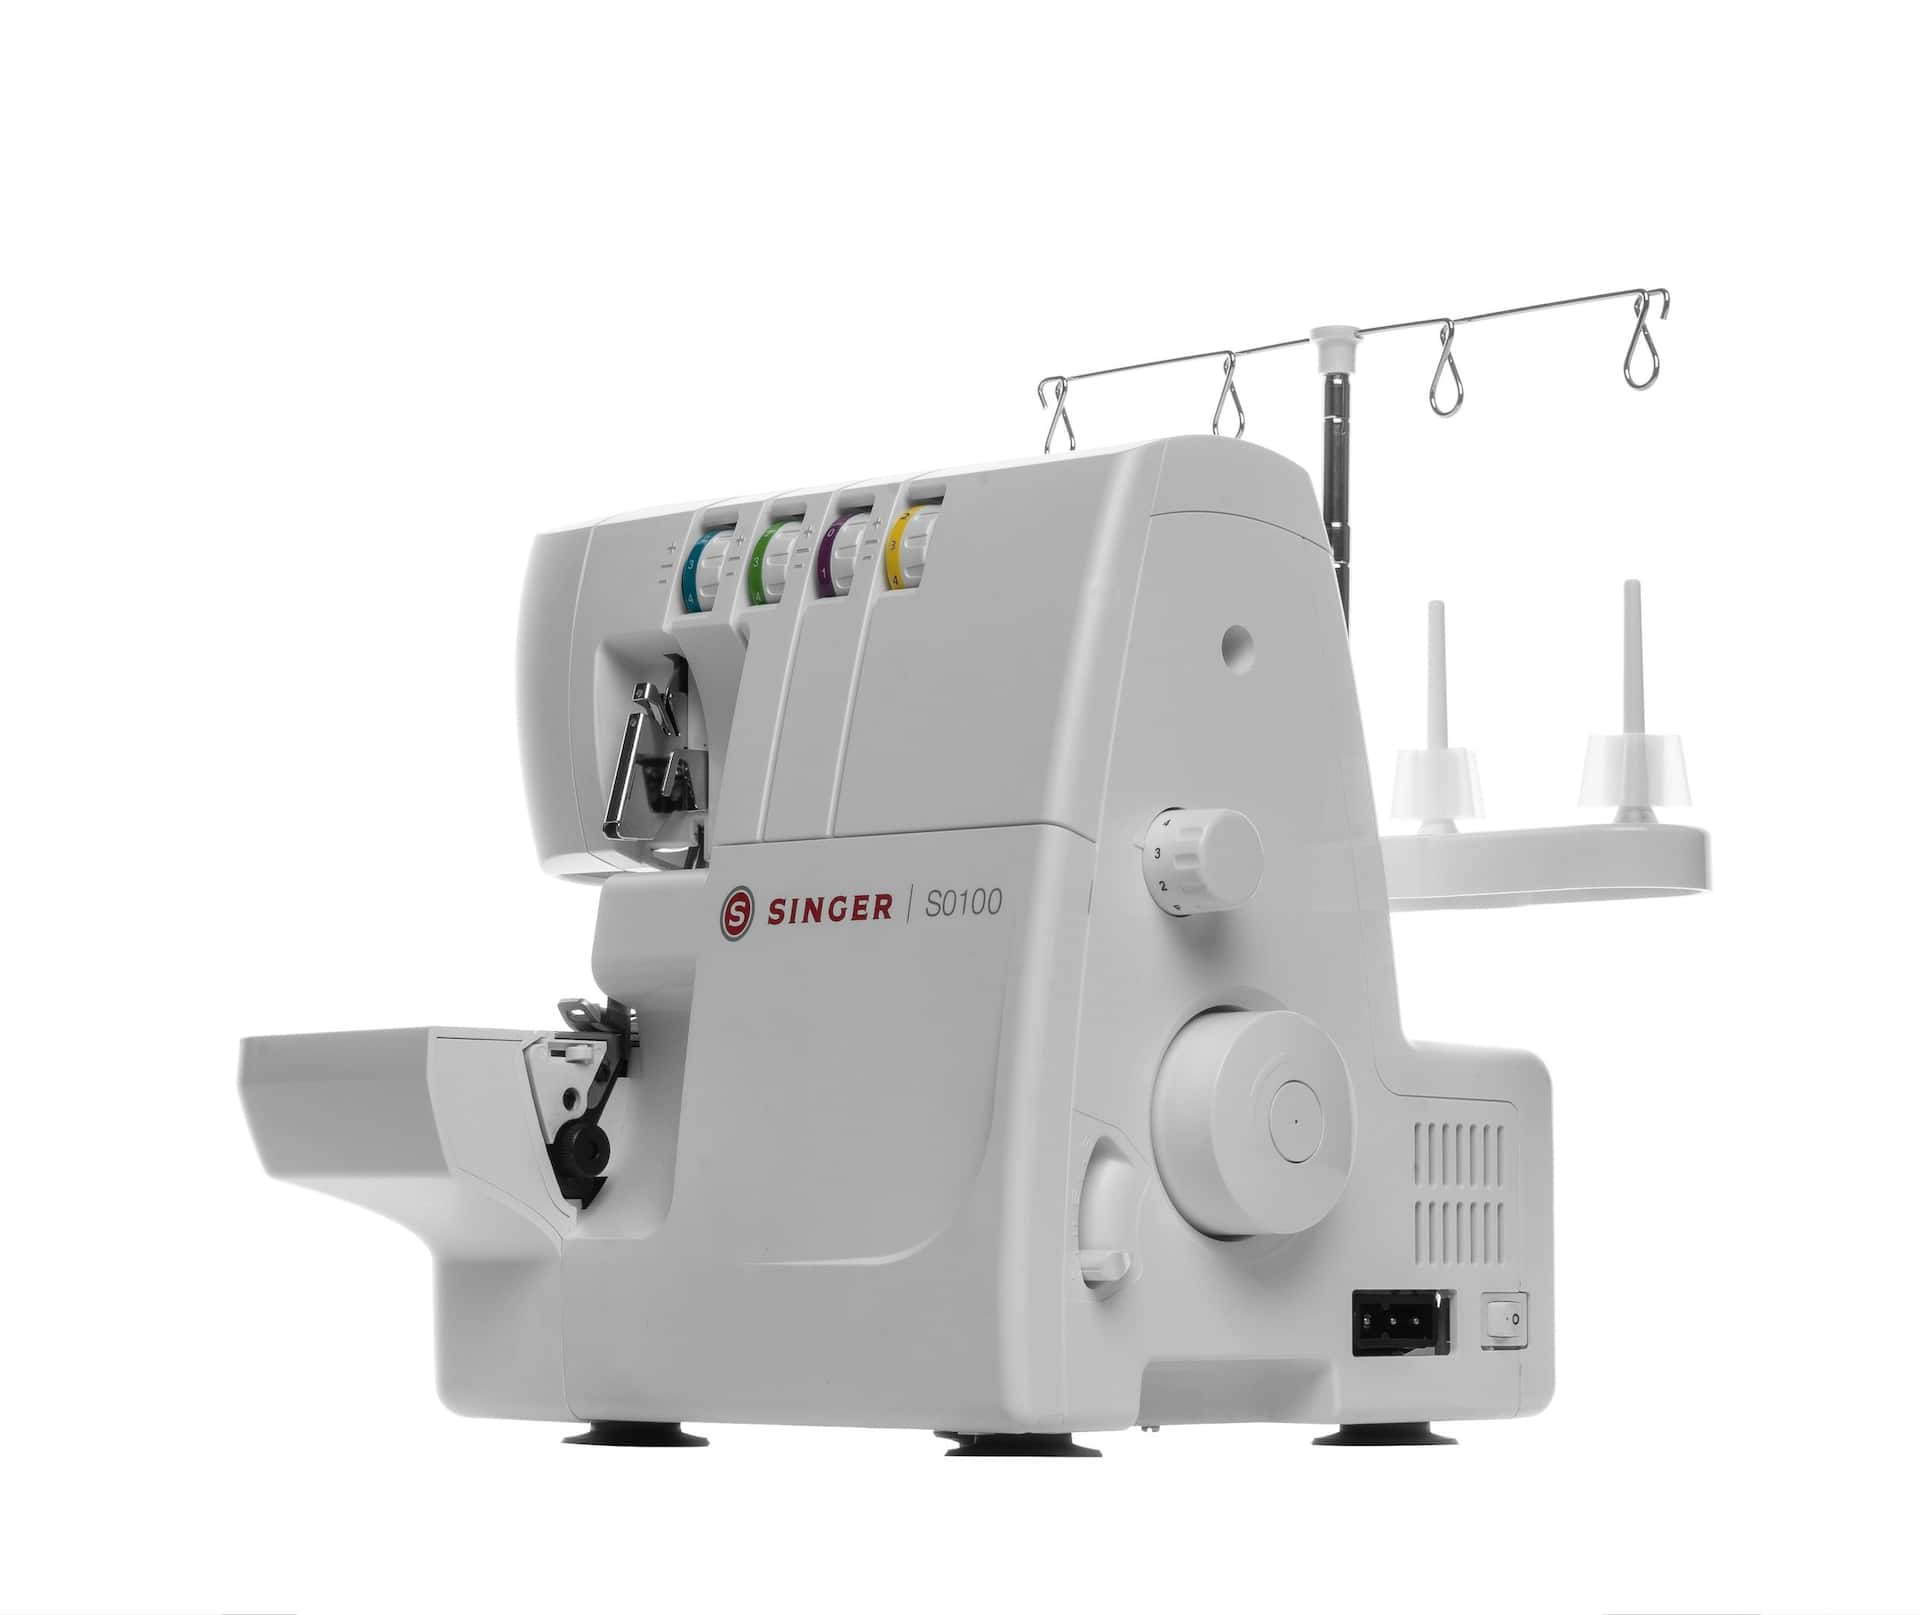 https://media-www.canadiantire.ca/product/living/personal-garment-care/garment-care/0438651/singer-s0100-serger-722d05b2-a1b8-4af4-9bf4-45daad298d8a-jpgrendition.jpg